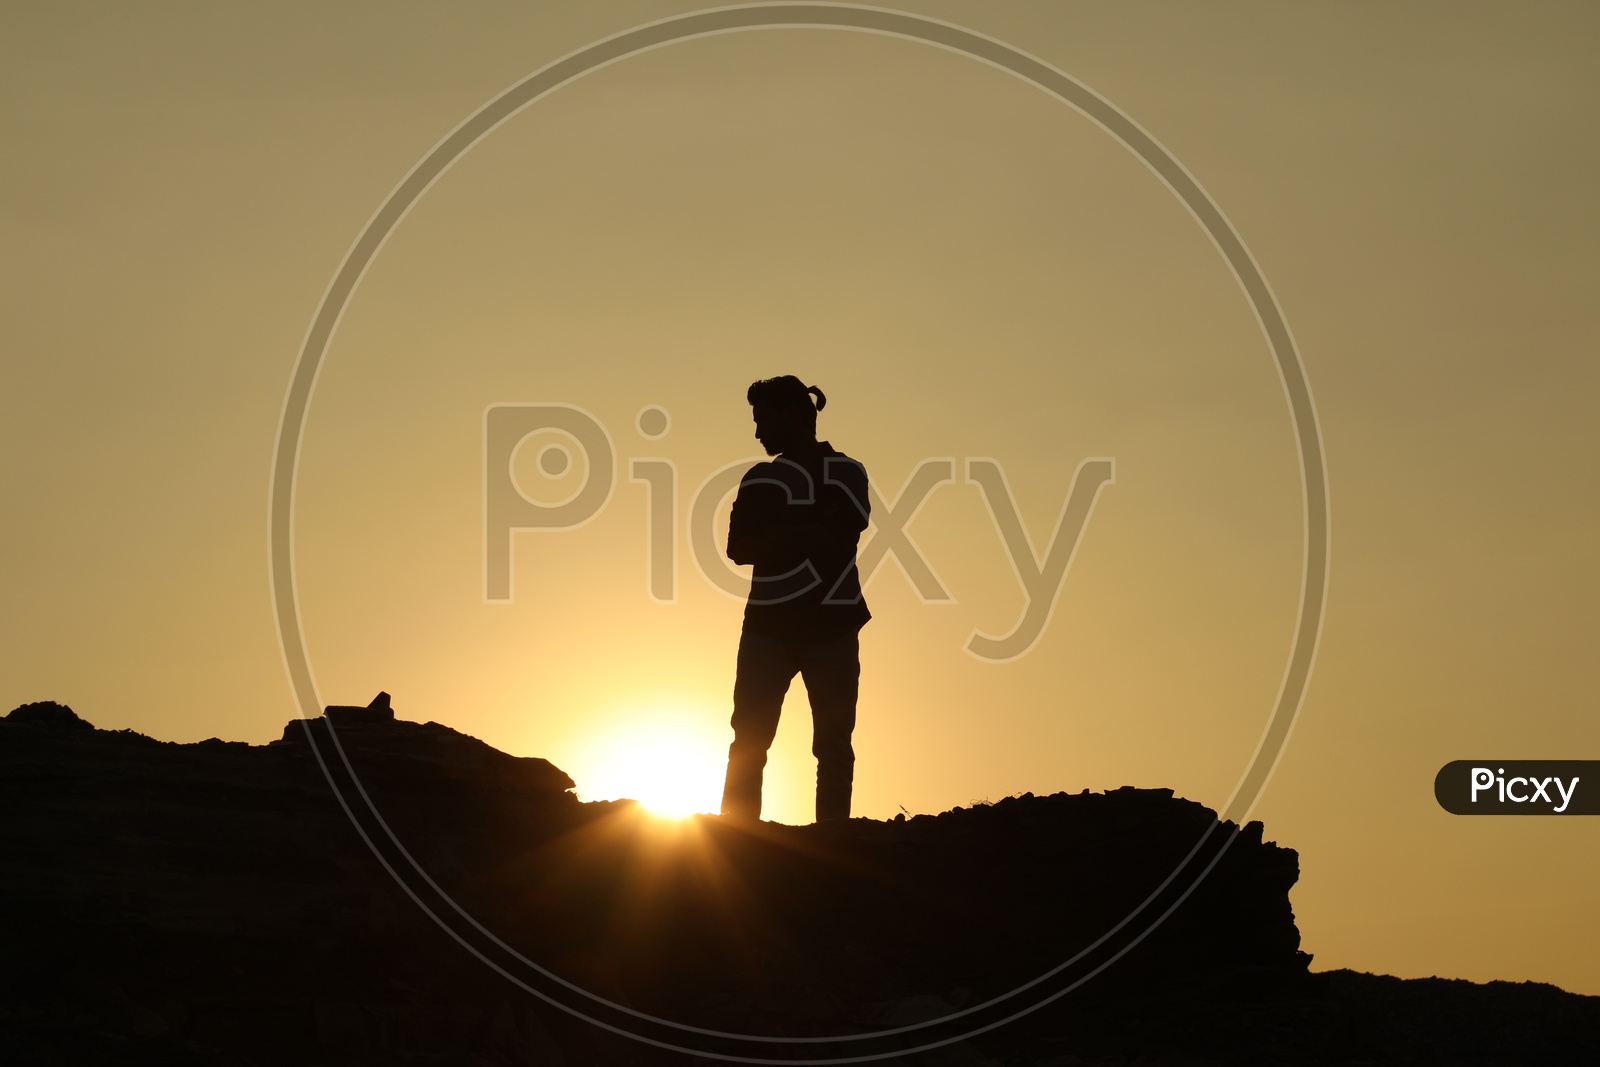 Silhouette of a man on top of the rocky hill